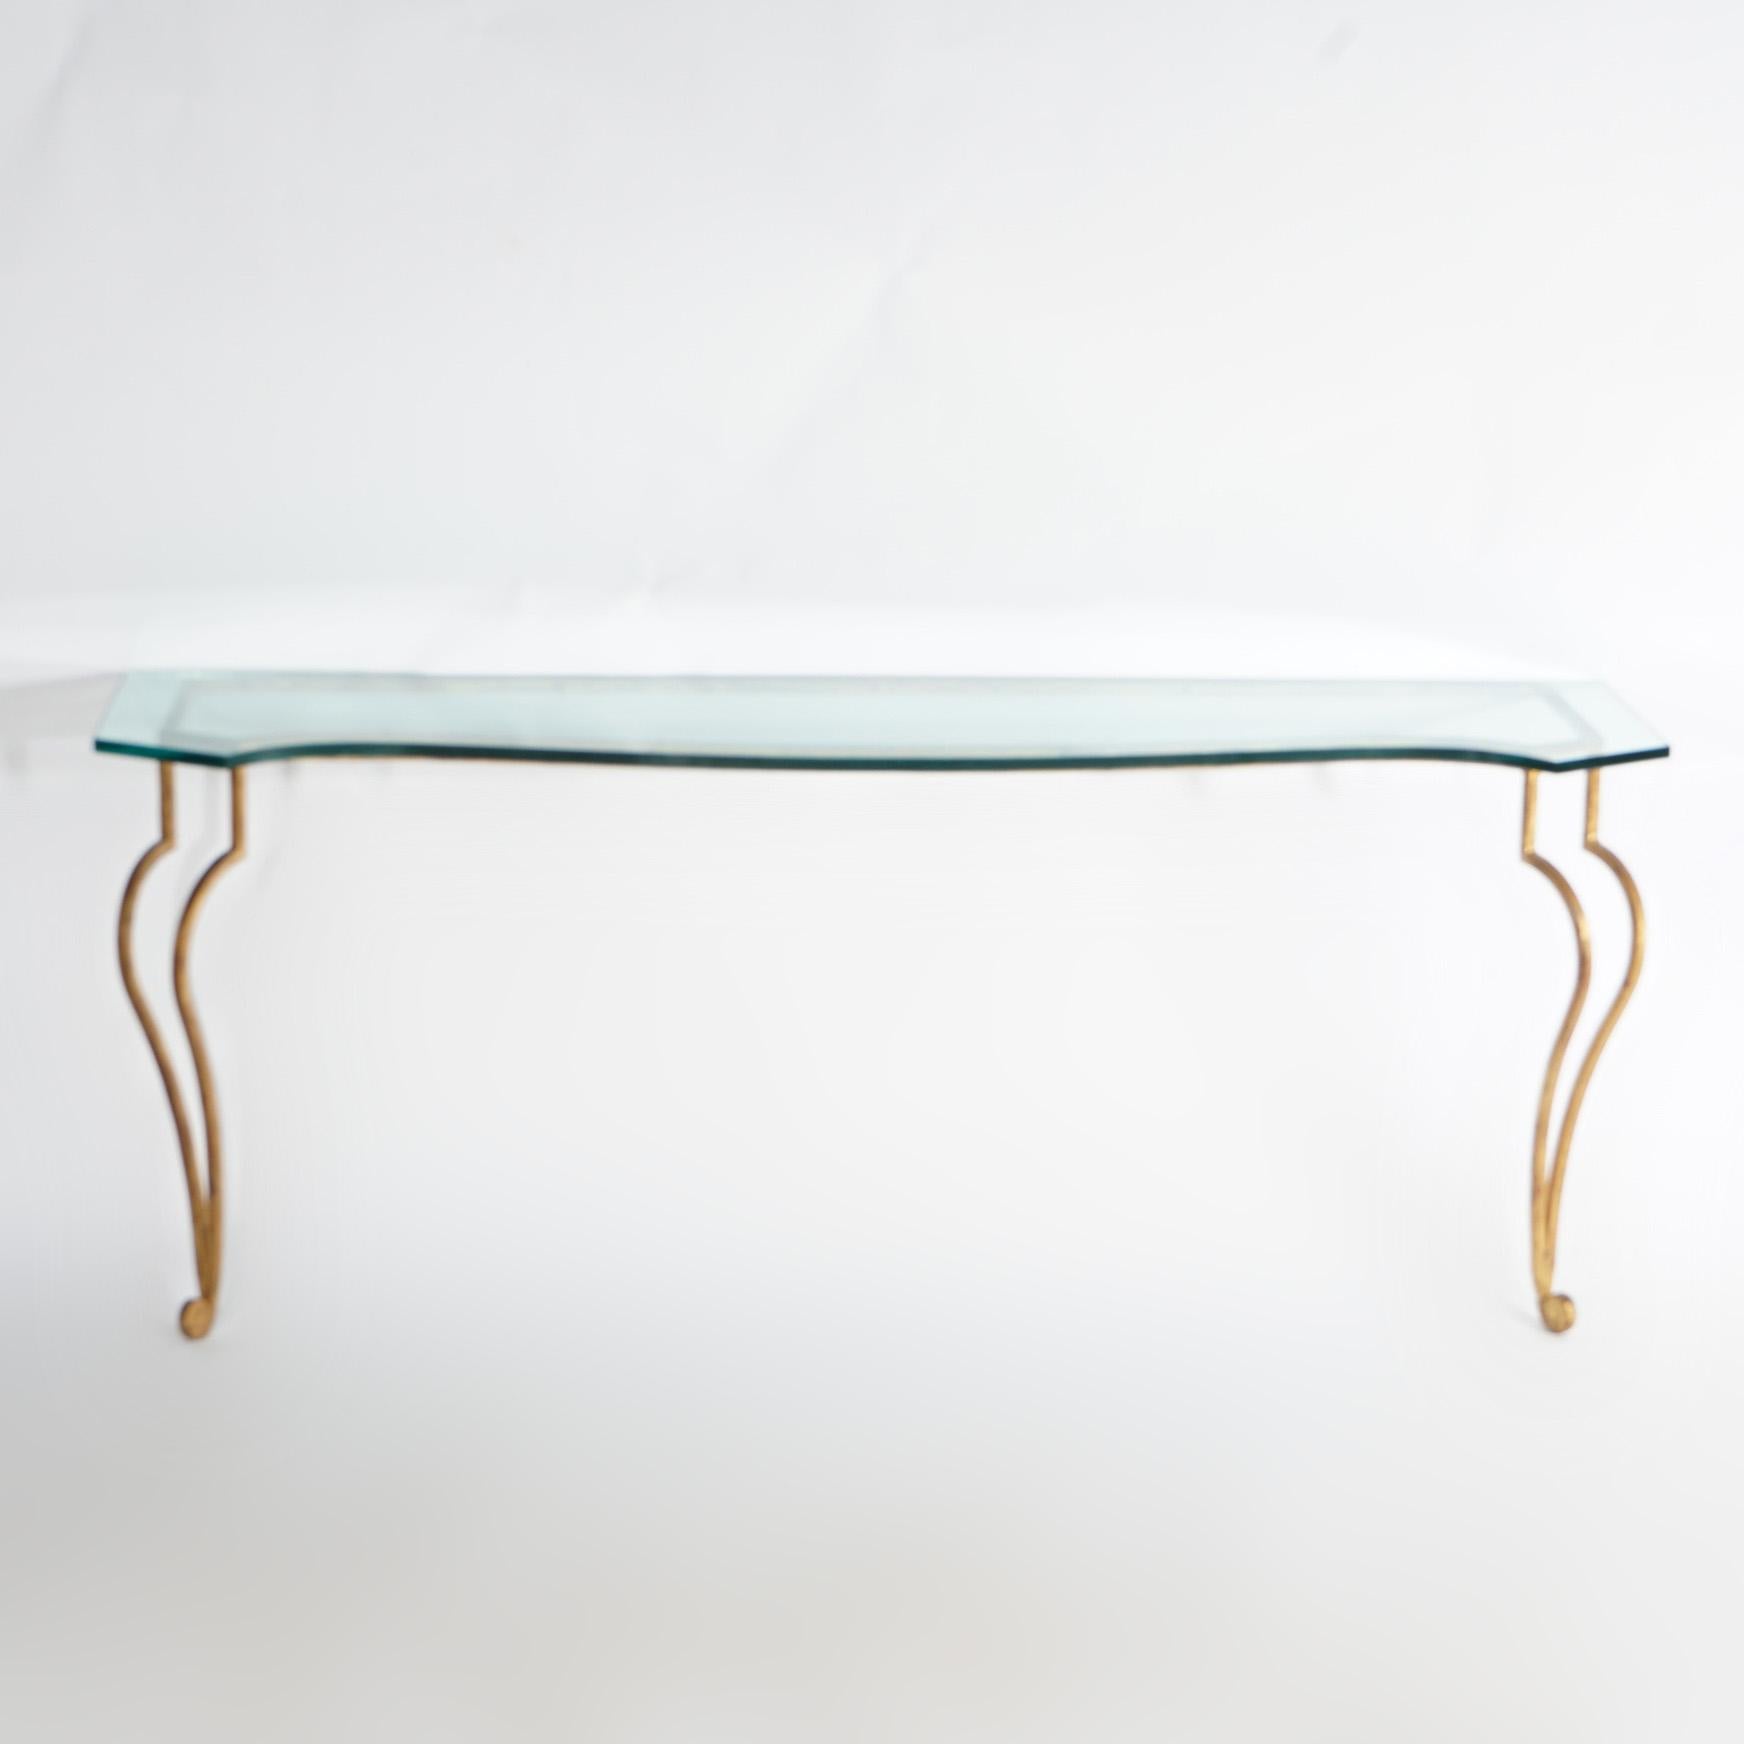 Italian Gold Gilt Wrought Iron Console Table with Glass Top 20th C In Good Condition For Sale In Big Flats, NY